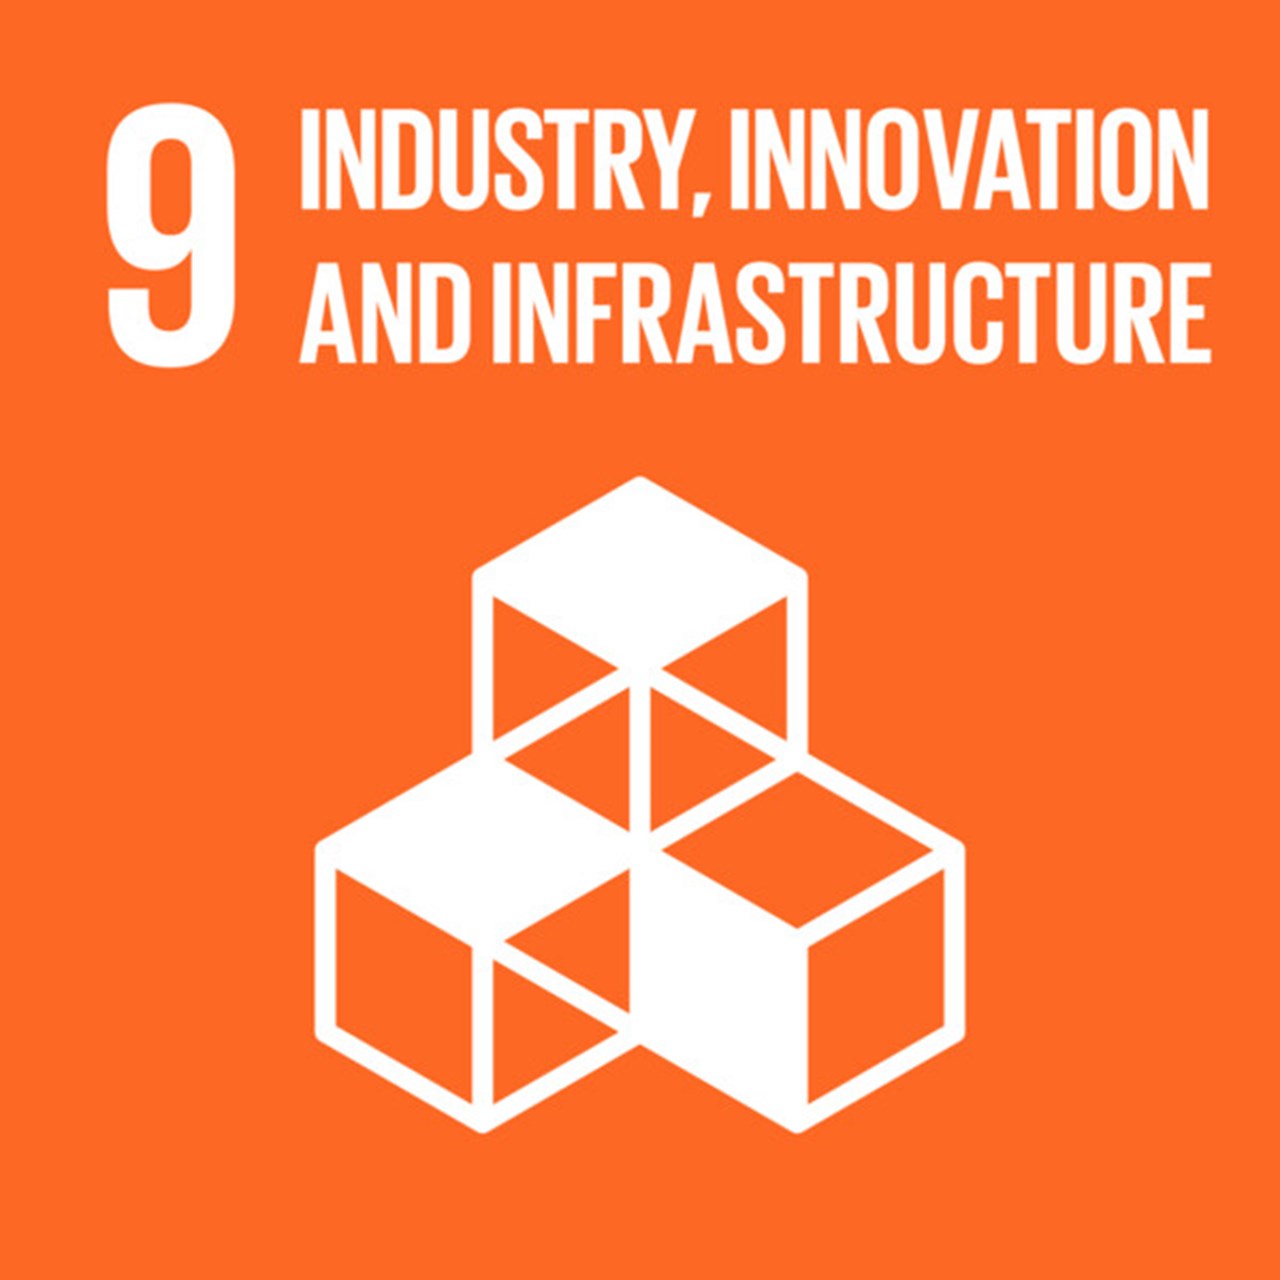 The Global Goals, Goal 9 - Industry, Innovation and Infrastructure